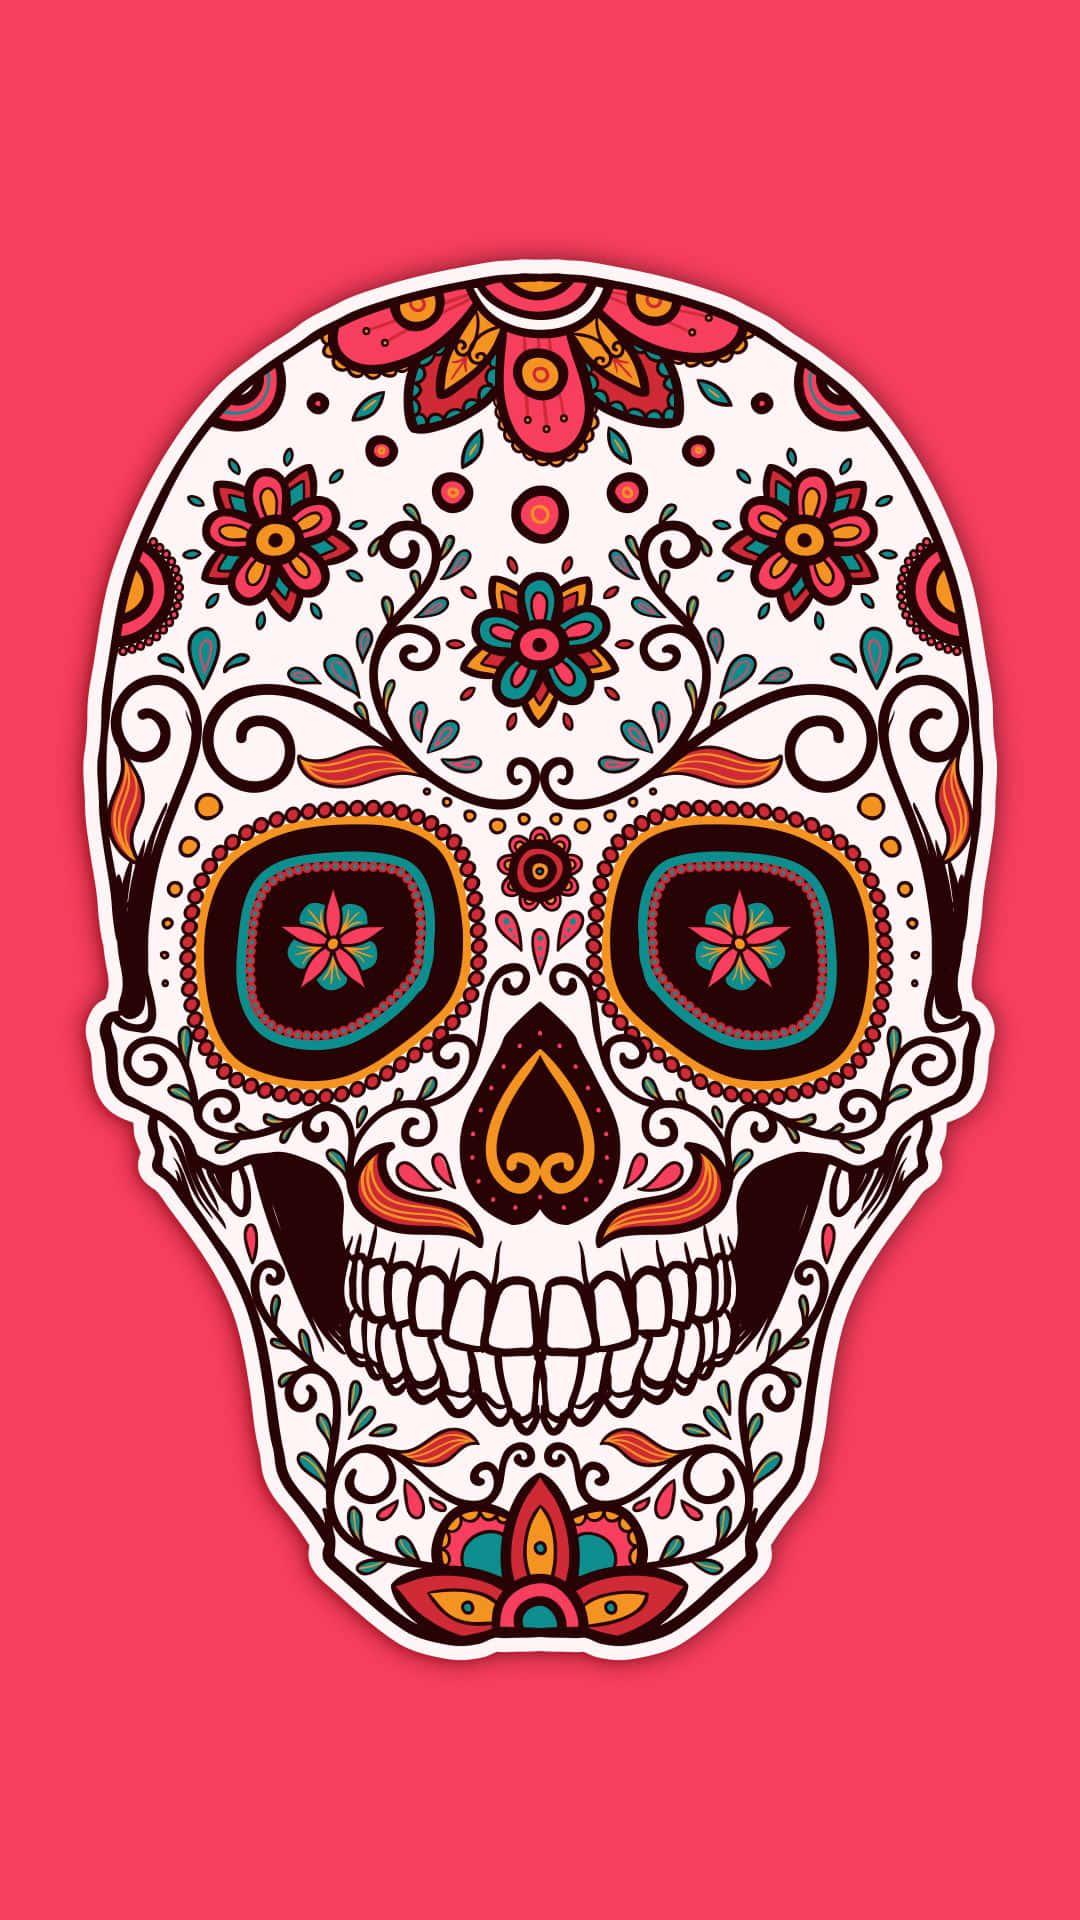 Brighten Up Your Day with a Pink Skull Wallpaper